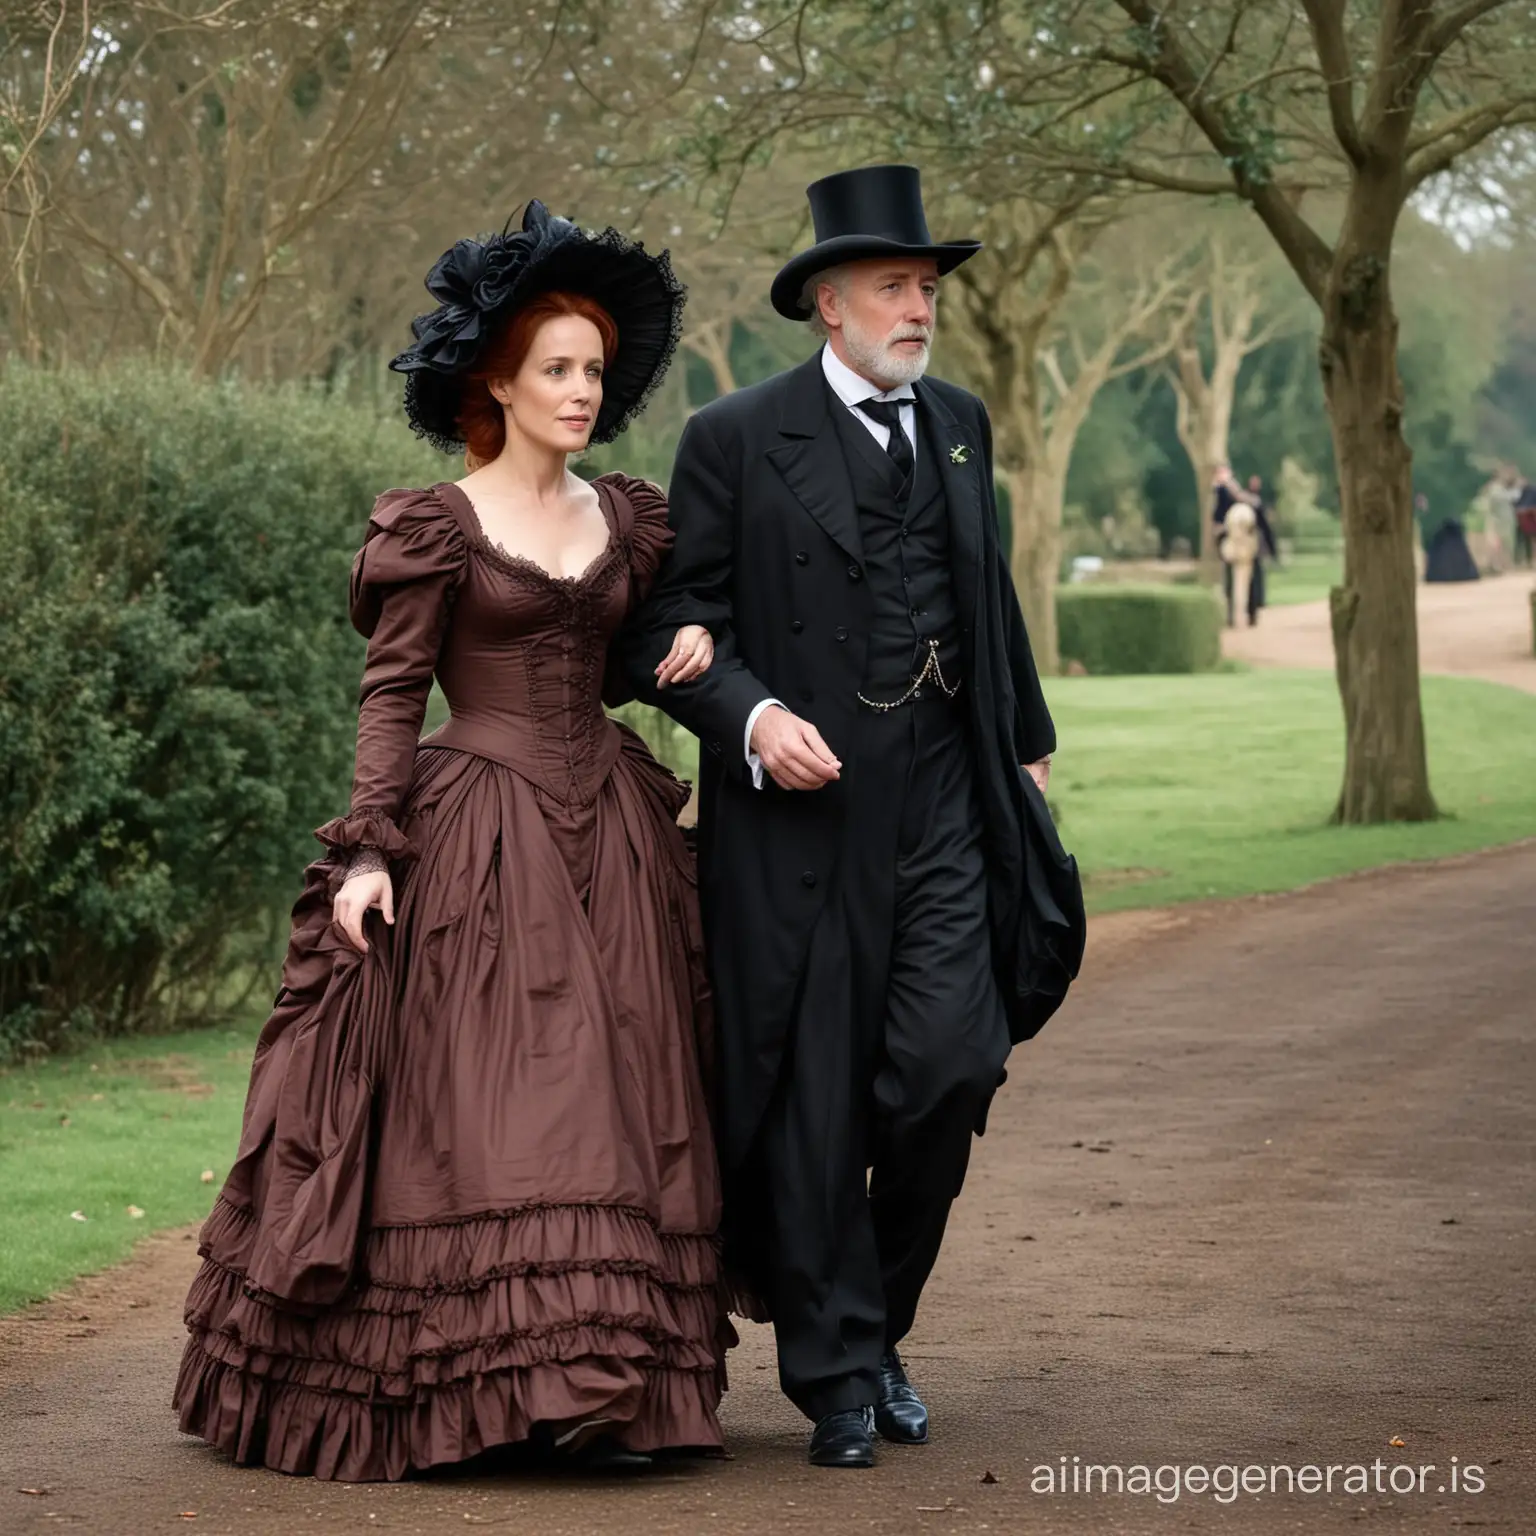 Victorian-Newlyweds-Elegant-RedHaired-Bride-and-Groom-Strolling-Together